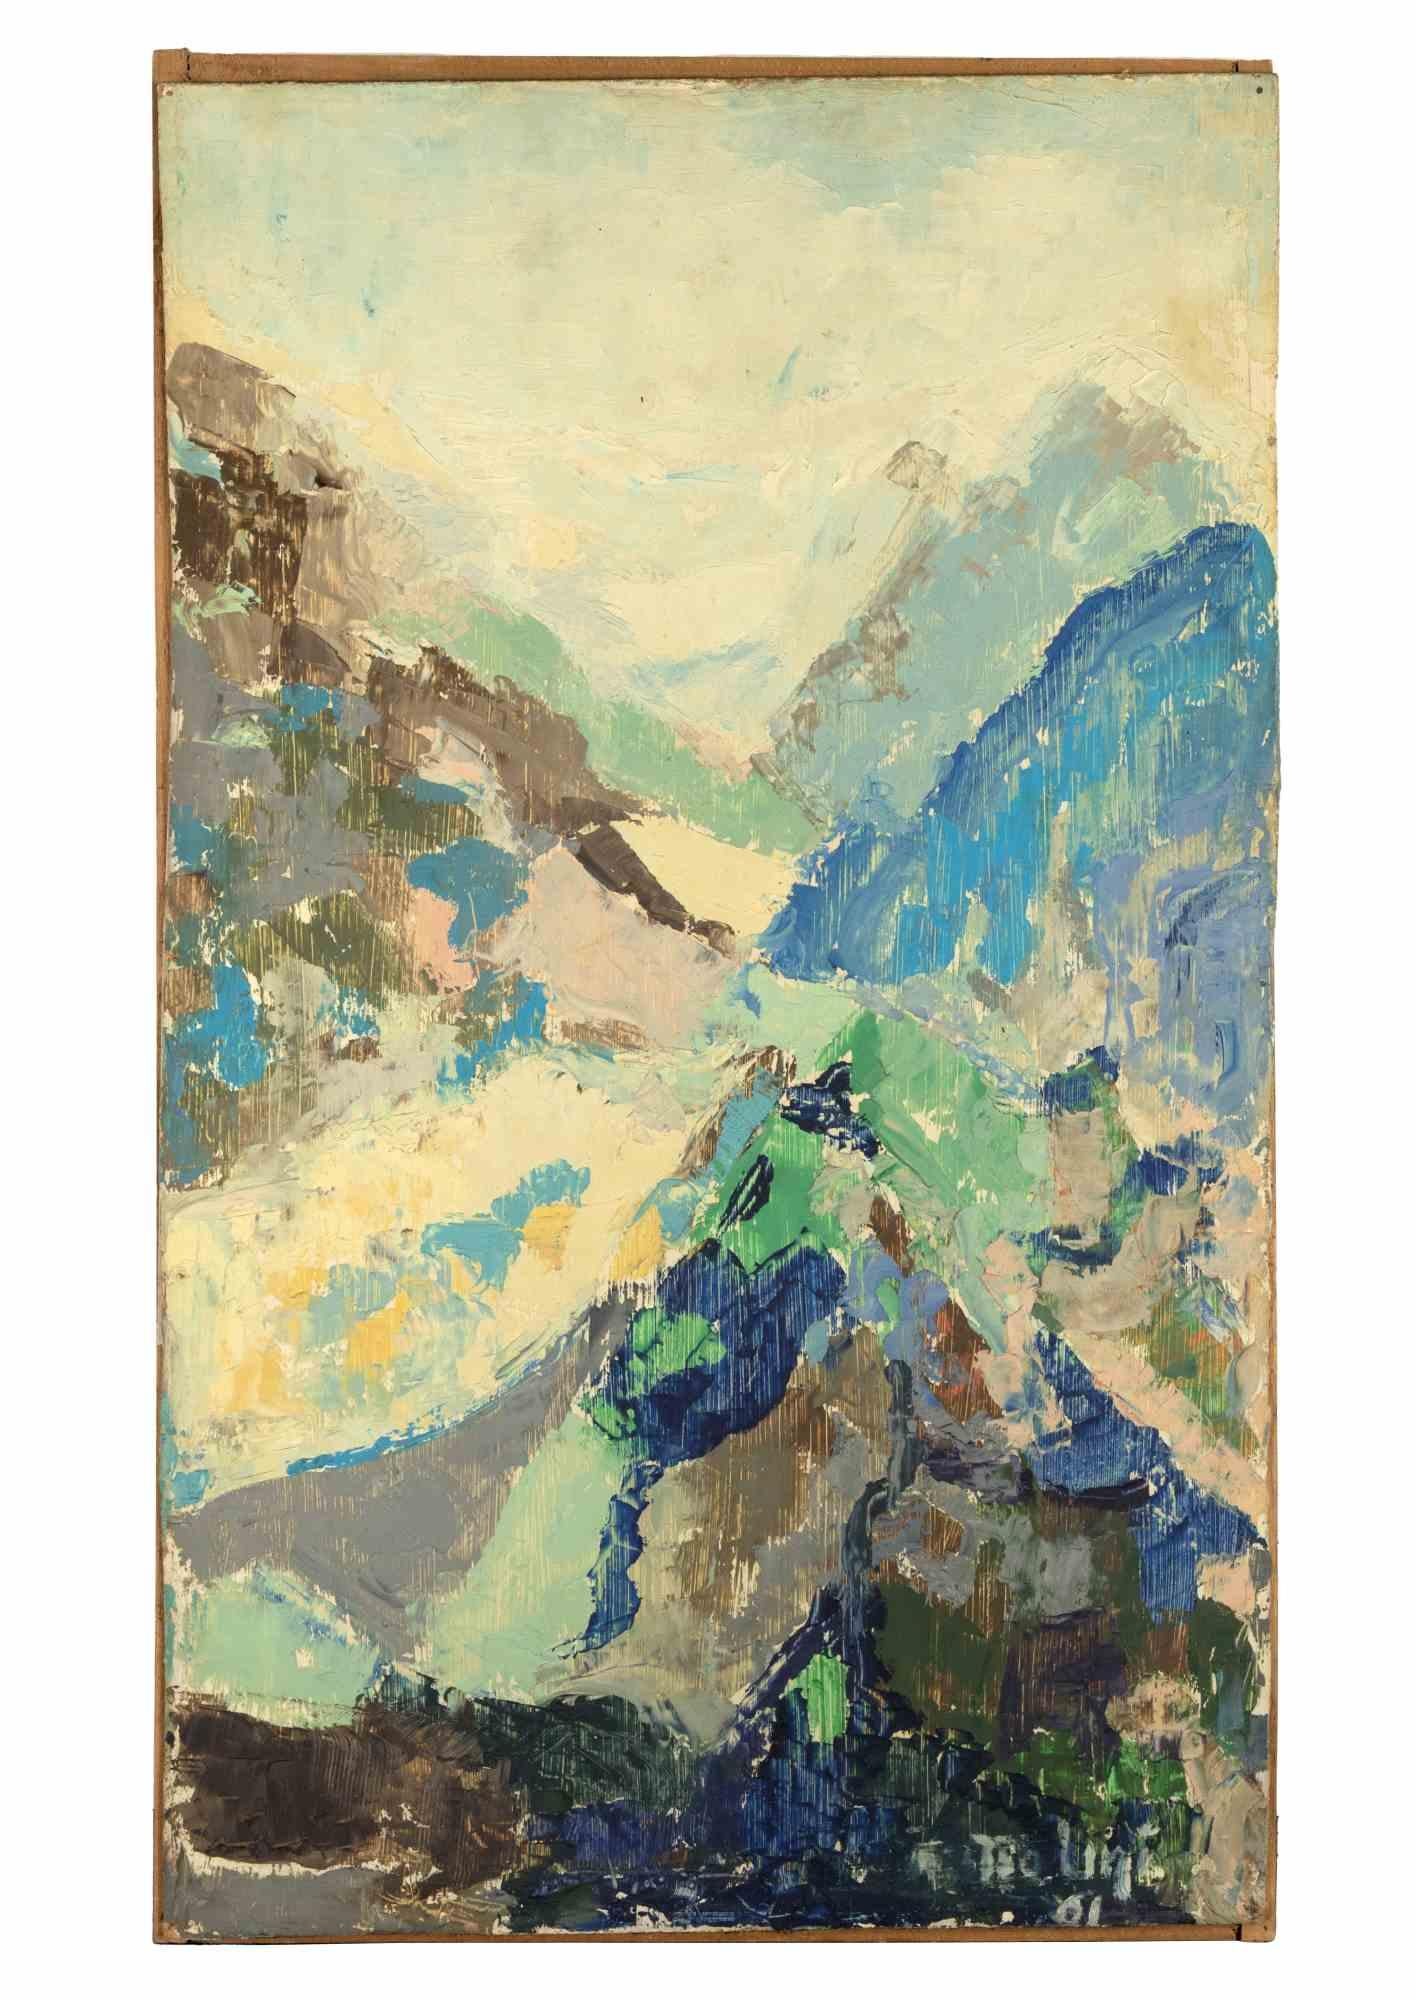 Mountain Landscape is a modern artwork realized by Carmelo Molino in 1961.

Mixed colored oil on canvas.

Hand signed and dated on the lower margin.